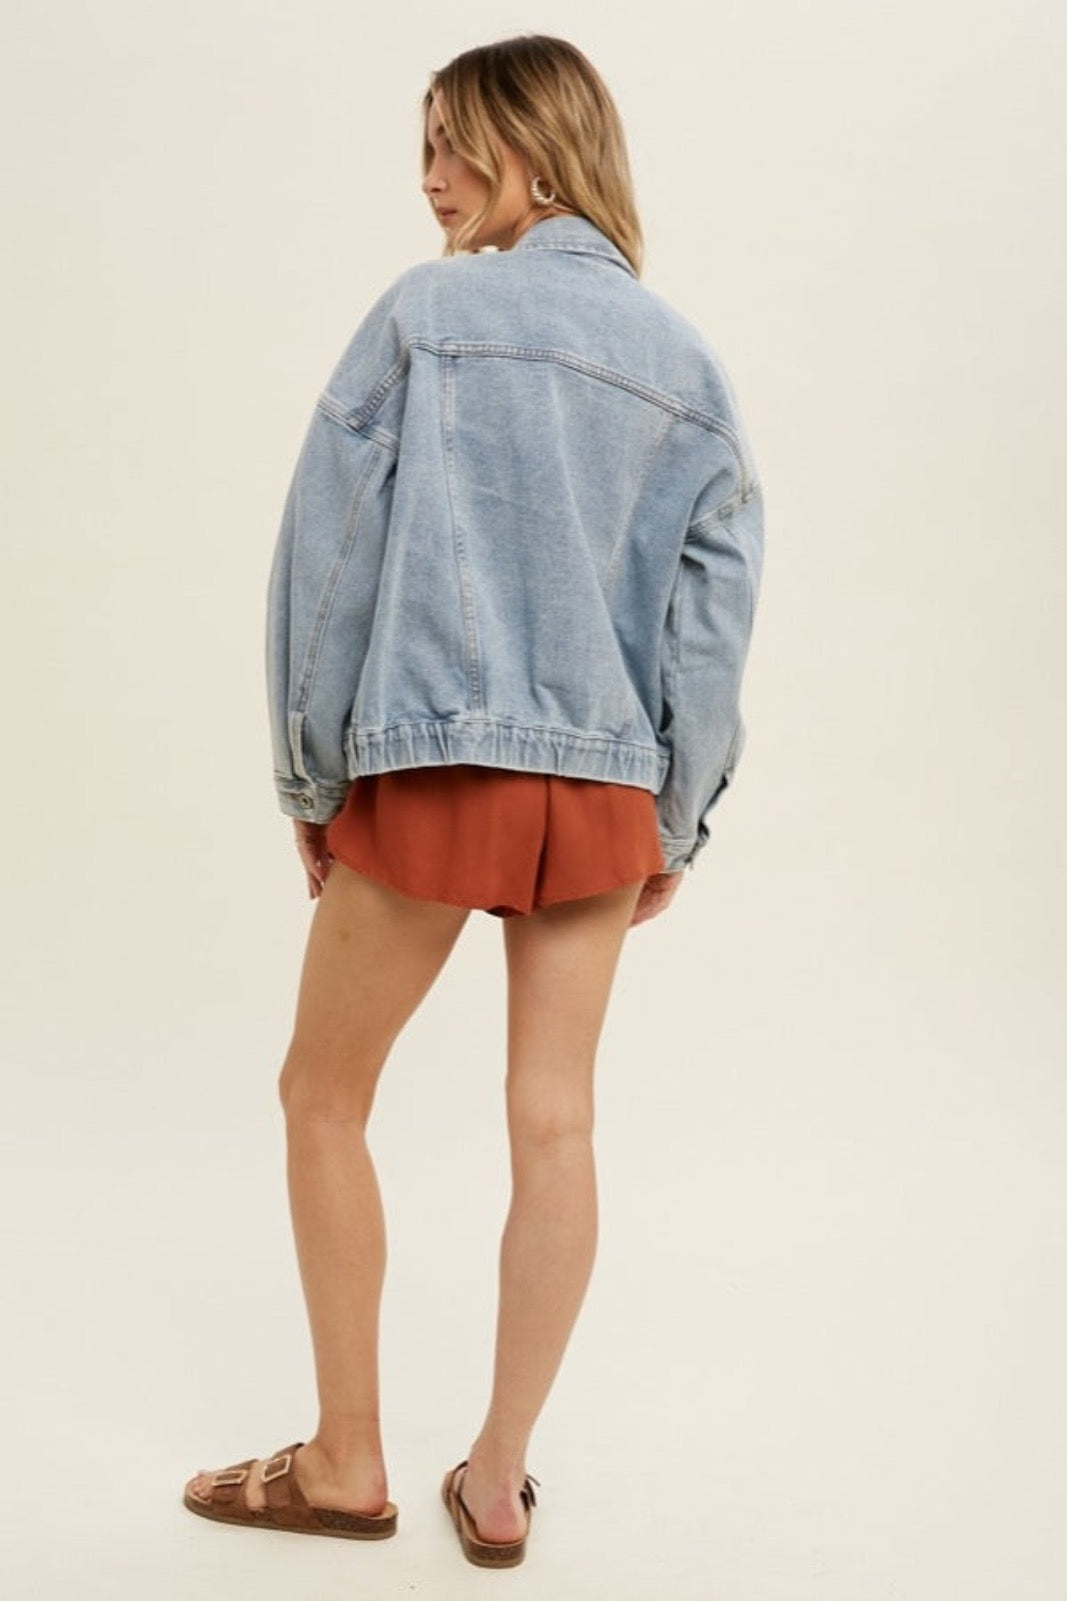 The Denim Jacket from Kadou Boutique. Back view.